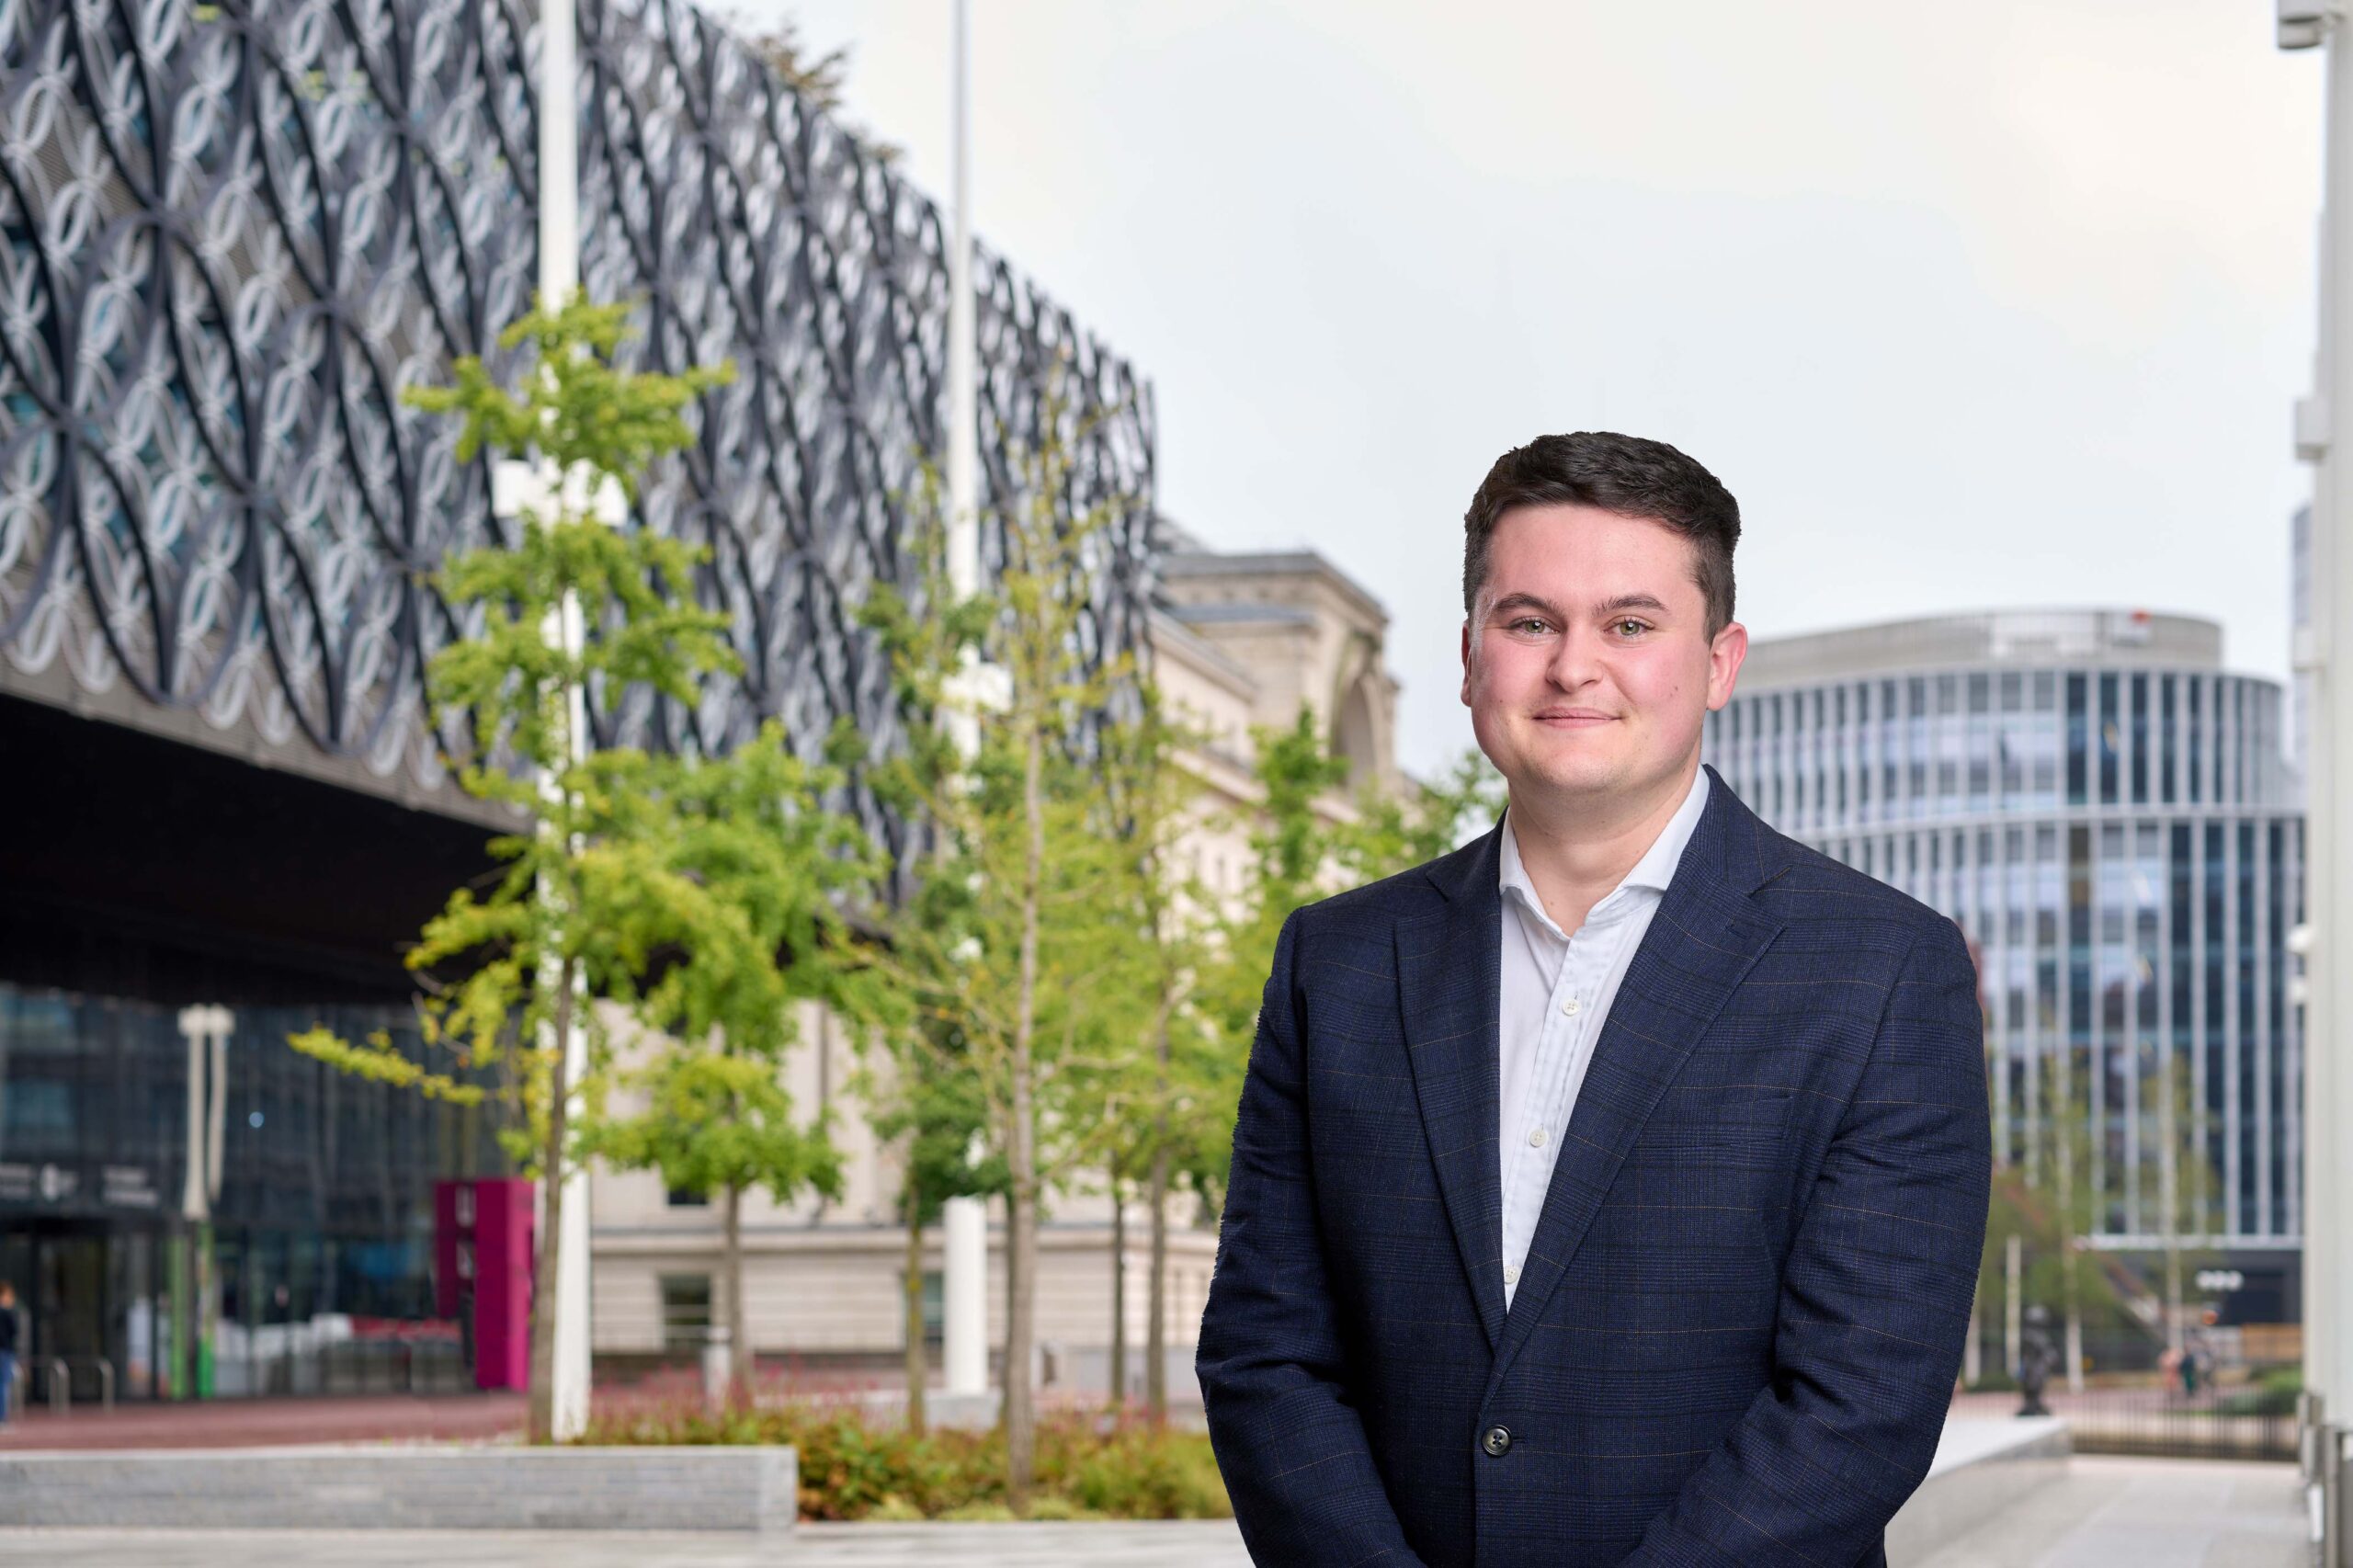 A man in a white shirt and black suit jacket is standing and smiling in front of some trees and buildings in central Birmingham.